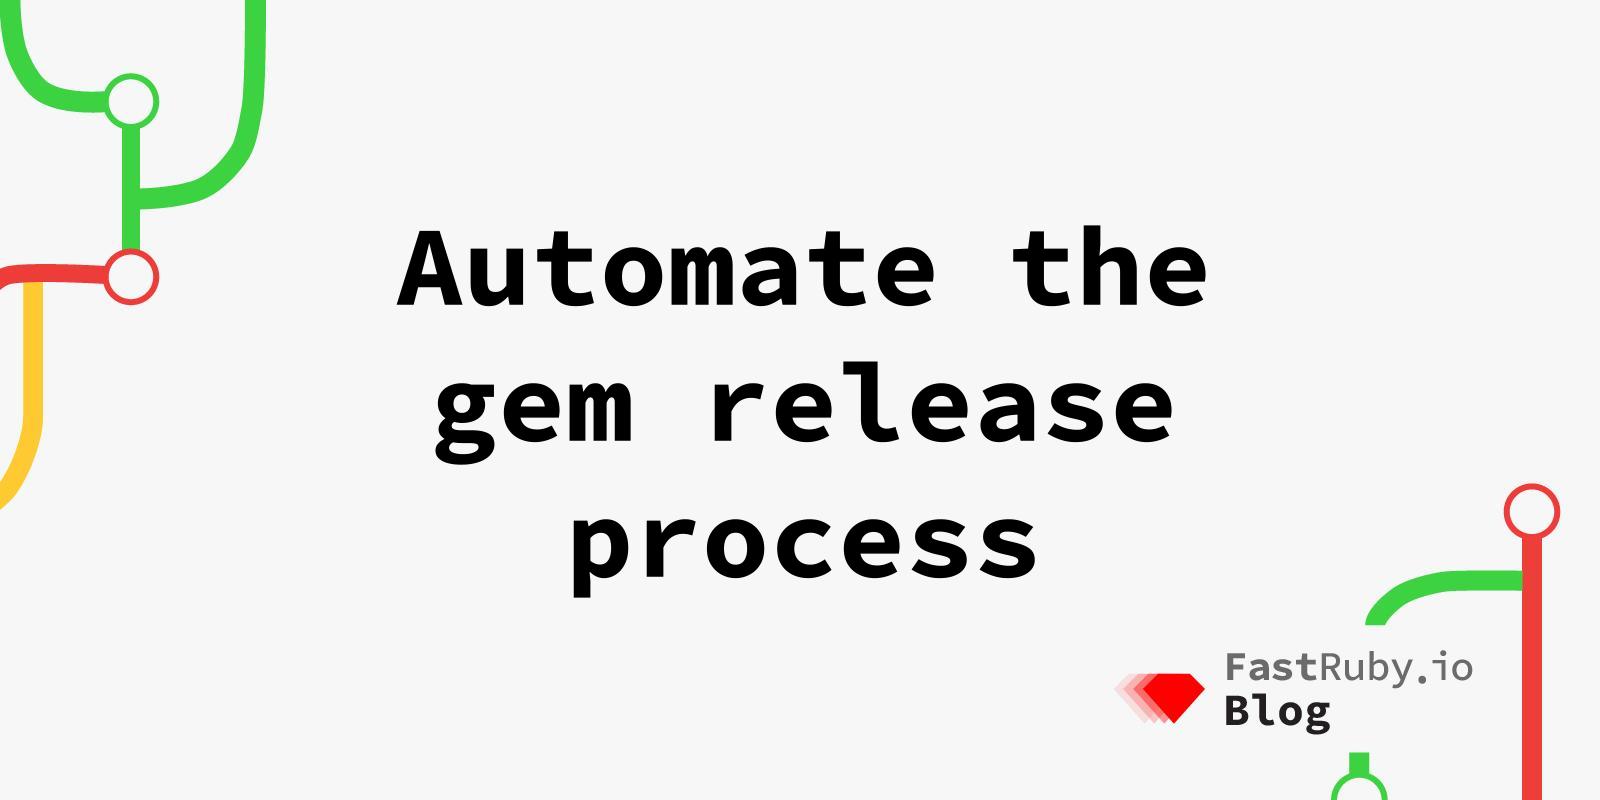 Automate the gem release process